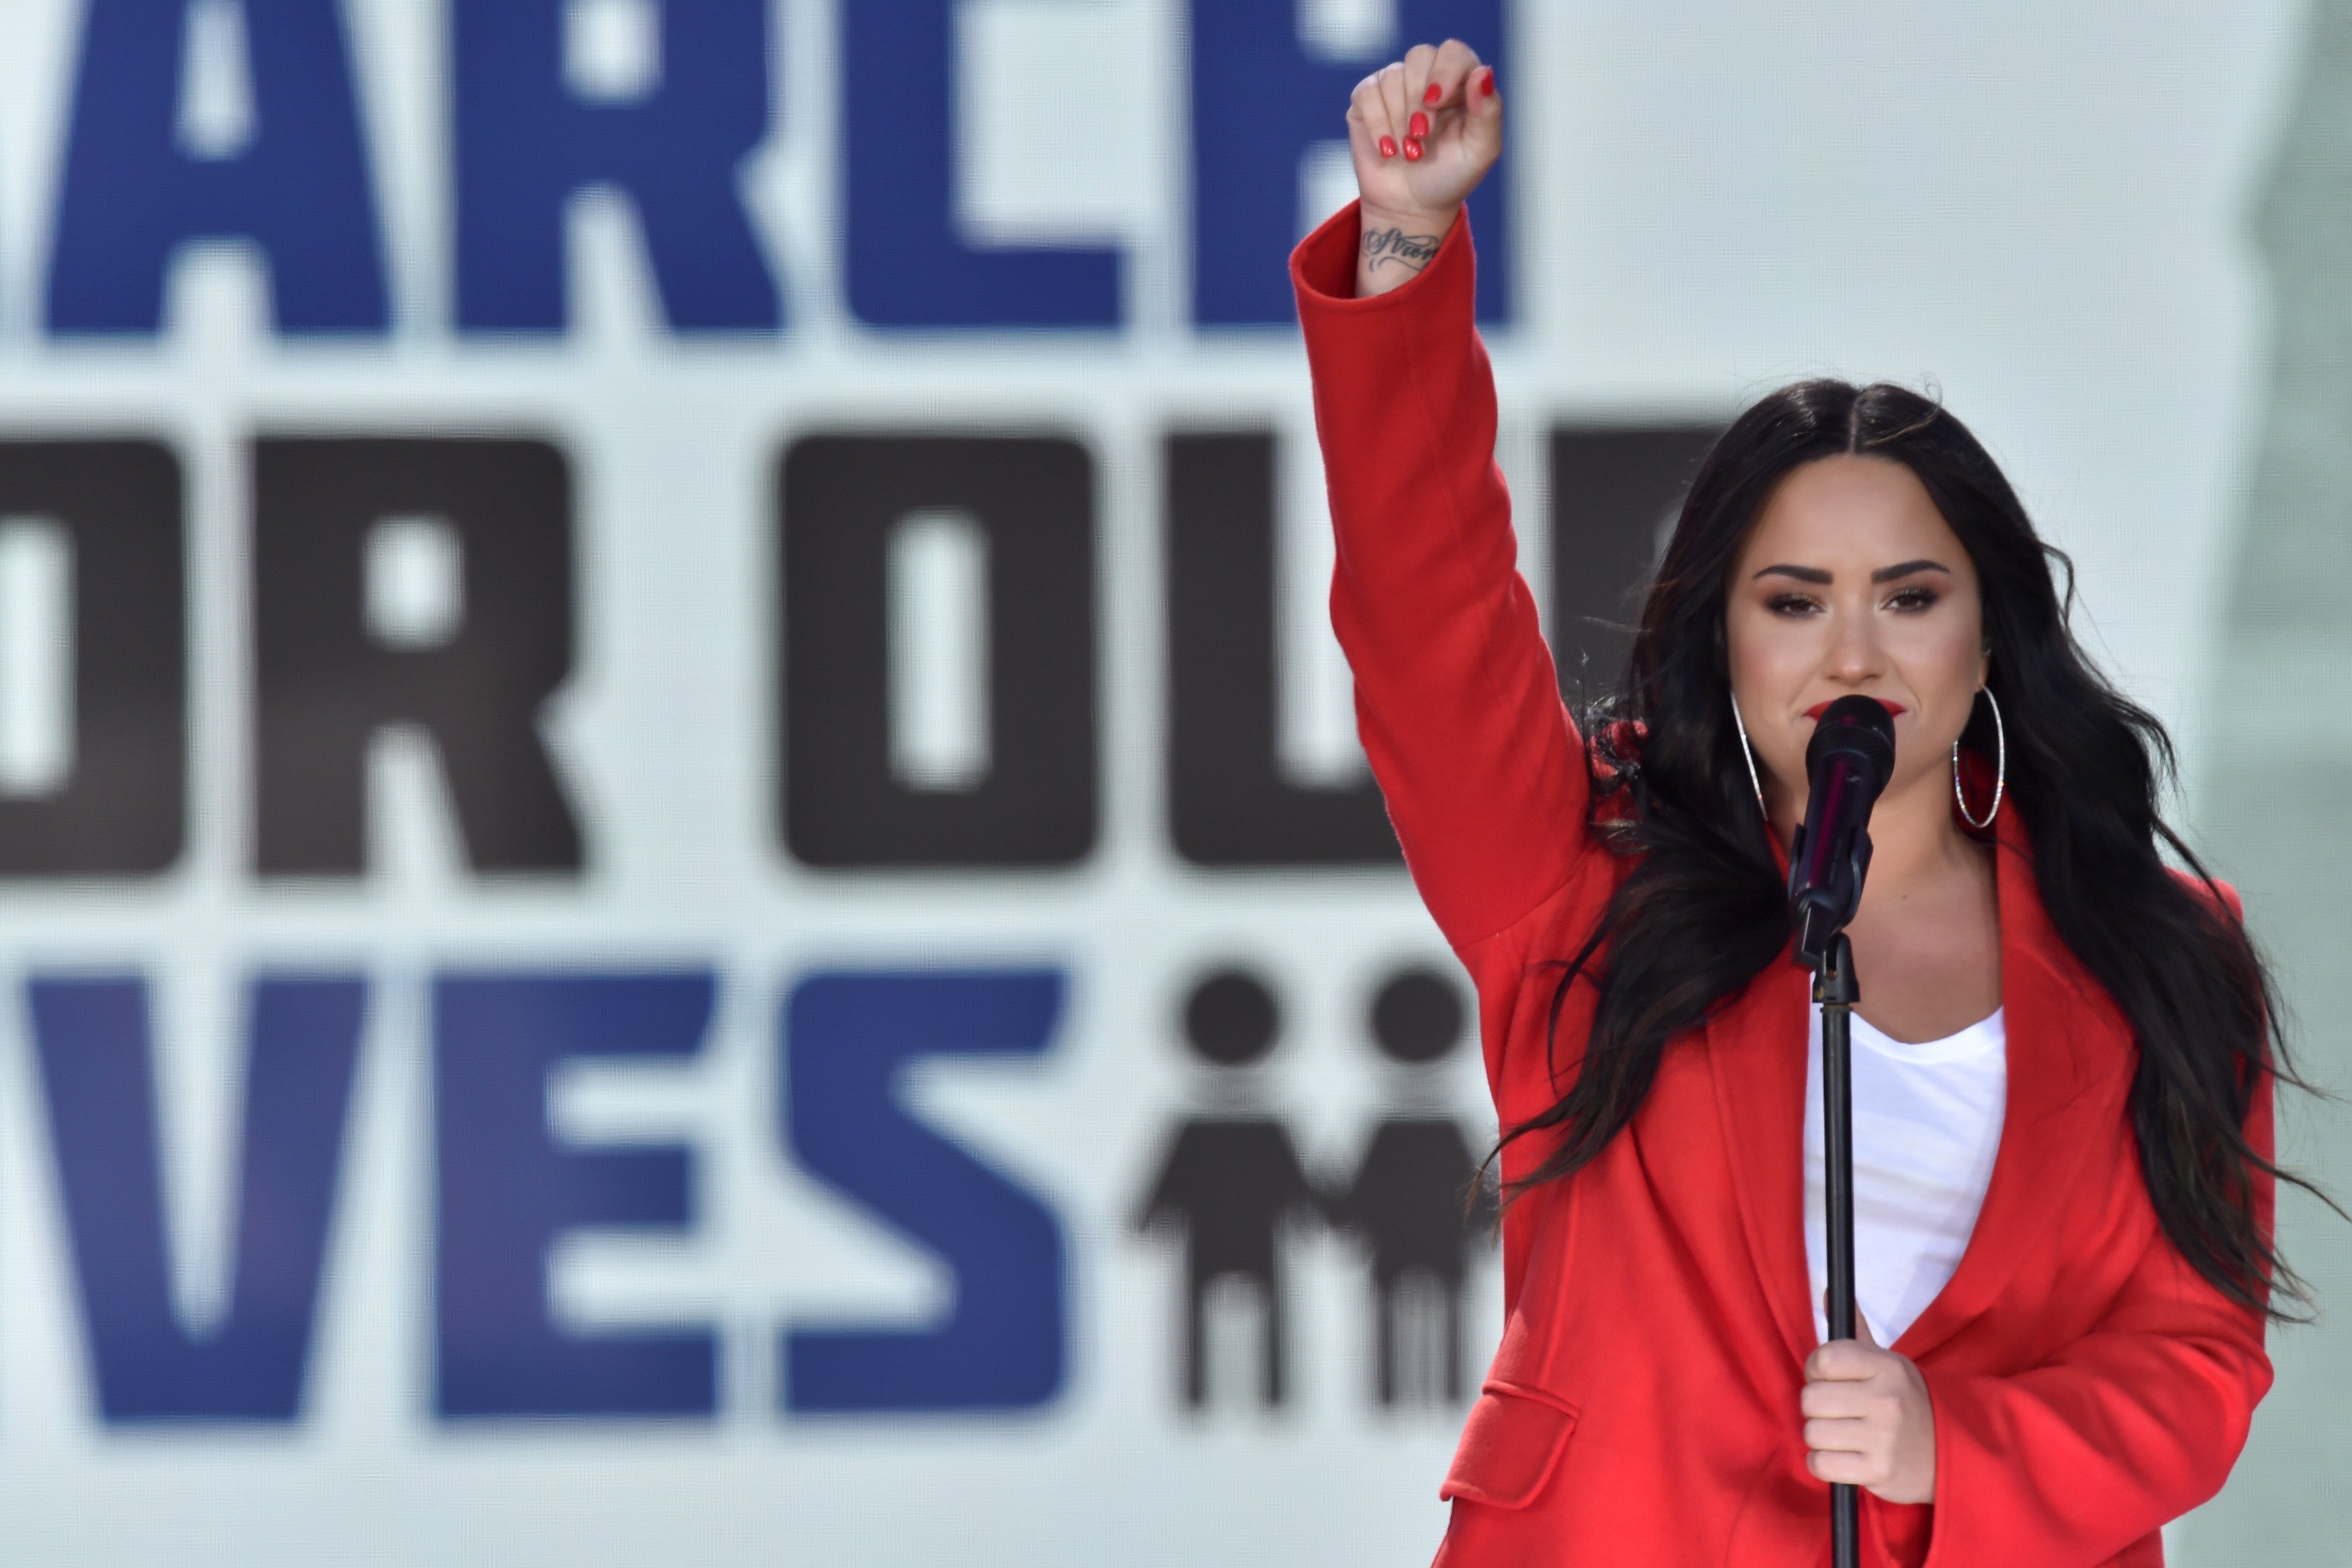 Demi Lovato sings at the March for Our Lives rally in Washington DC in March 2018